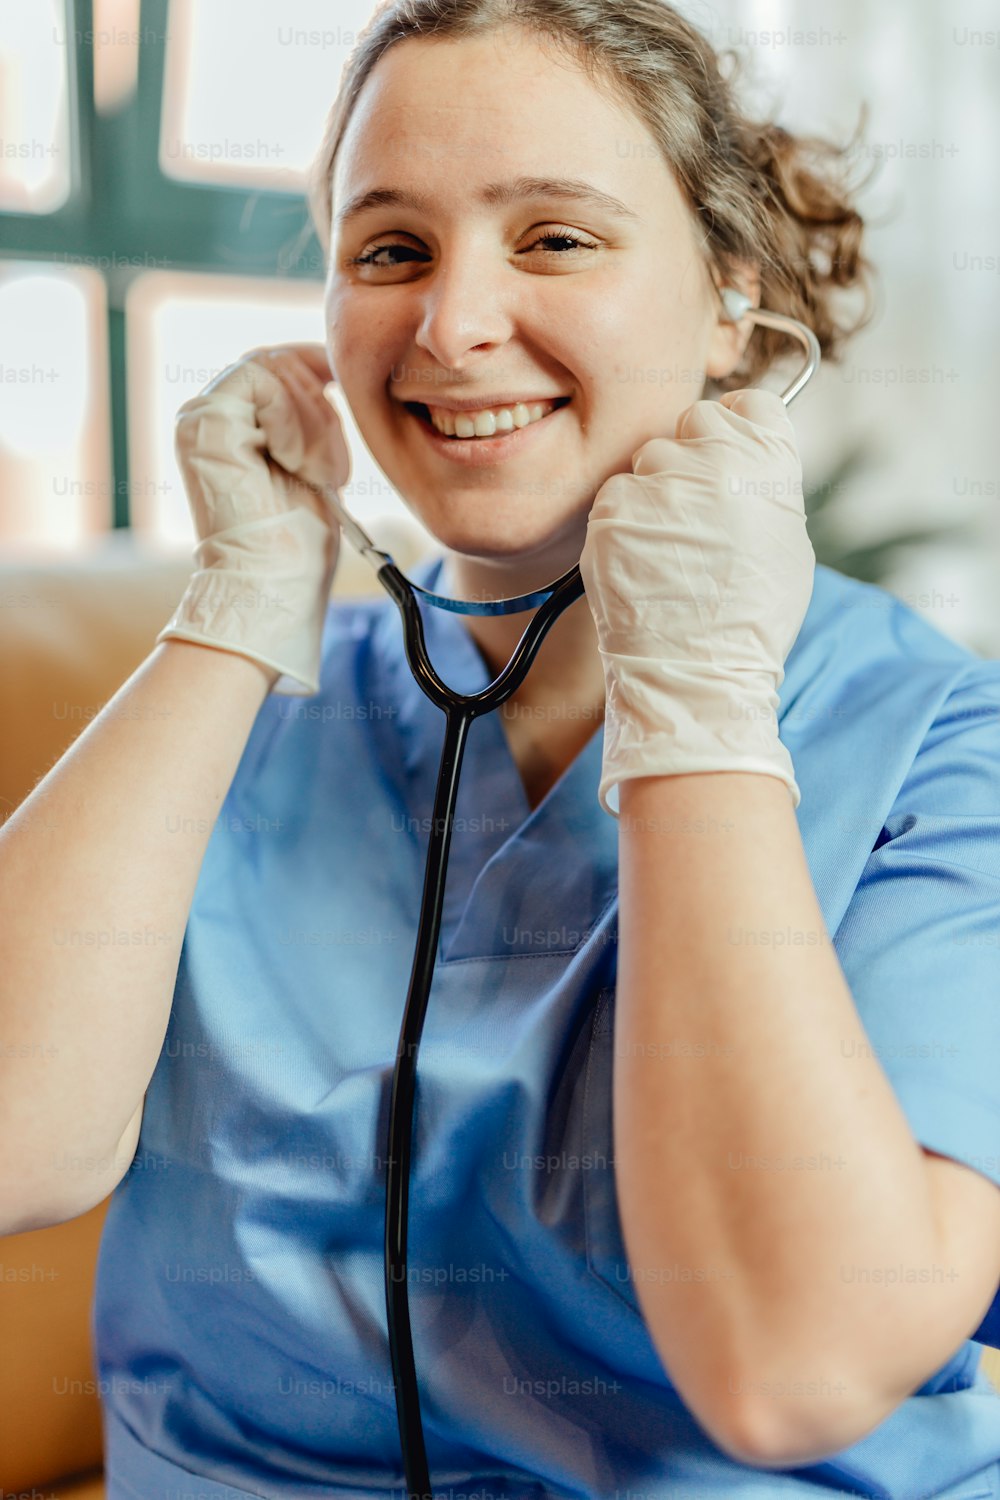 a woman in scrubs and a stethoscope is smiling